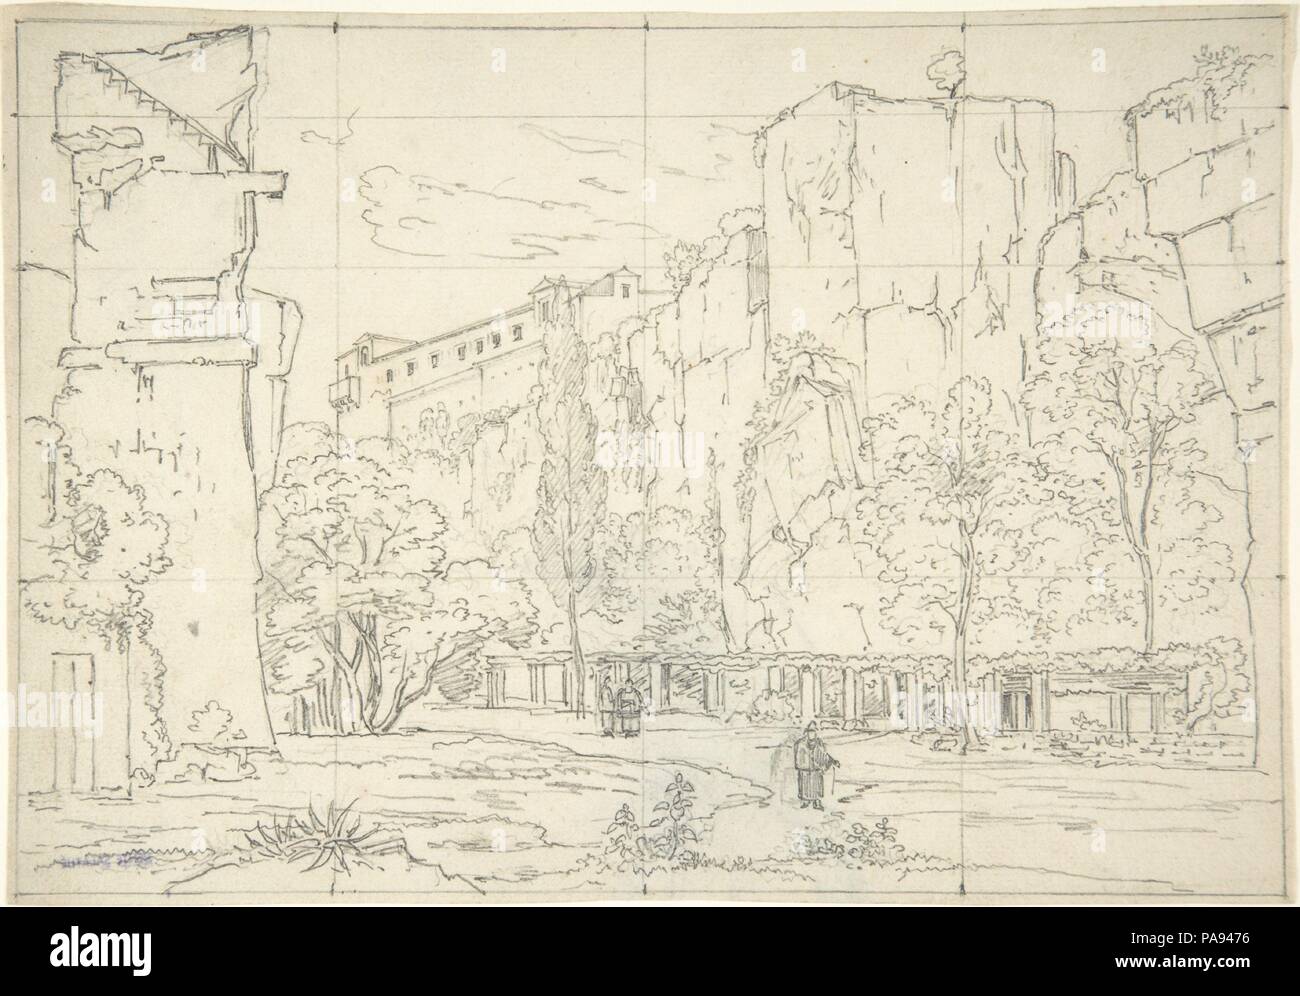 Italian View: A Pathway and Arbor at the Base of Cliffs. Artist: Friedrich Salathé (Swiss, Binningen 1793-1860 Paris). Dimensions: sheet: 5 15/16 x 8 7/16 in. (15.1 x 21.5 cm). Date: 1815-21.  By planting the viewer firmly on the ground, Salathé emphasizes the imposing height of the cliffs in this unusual landscape of the Roman countryside. The artist first traveled to Rome in 1815 and remained there until 1821. The Swiss draftsman later established himself as a printmaker in Paris, and he may have squared this drawing for the purpose of making a print, although the uneven nature of the grid i Stock Photo